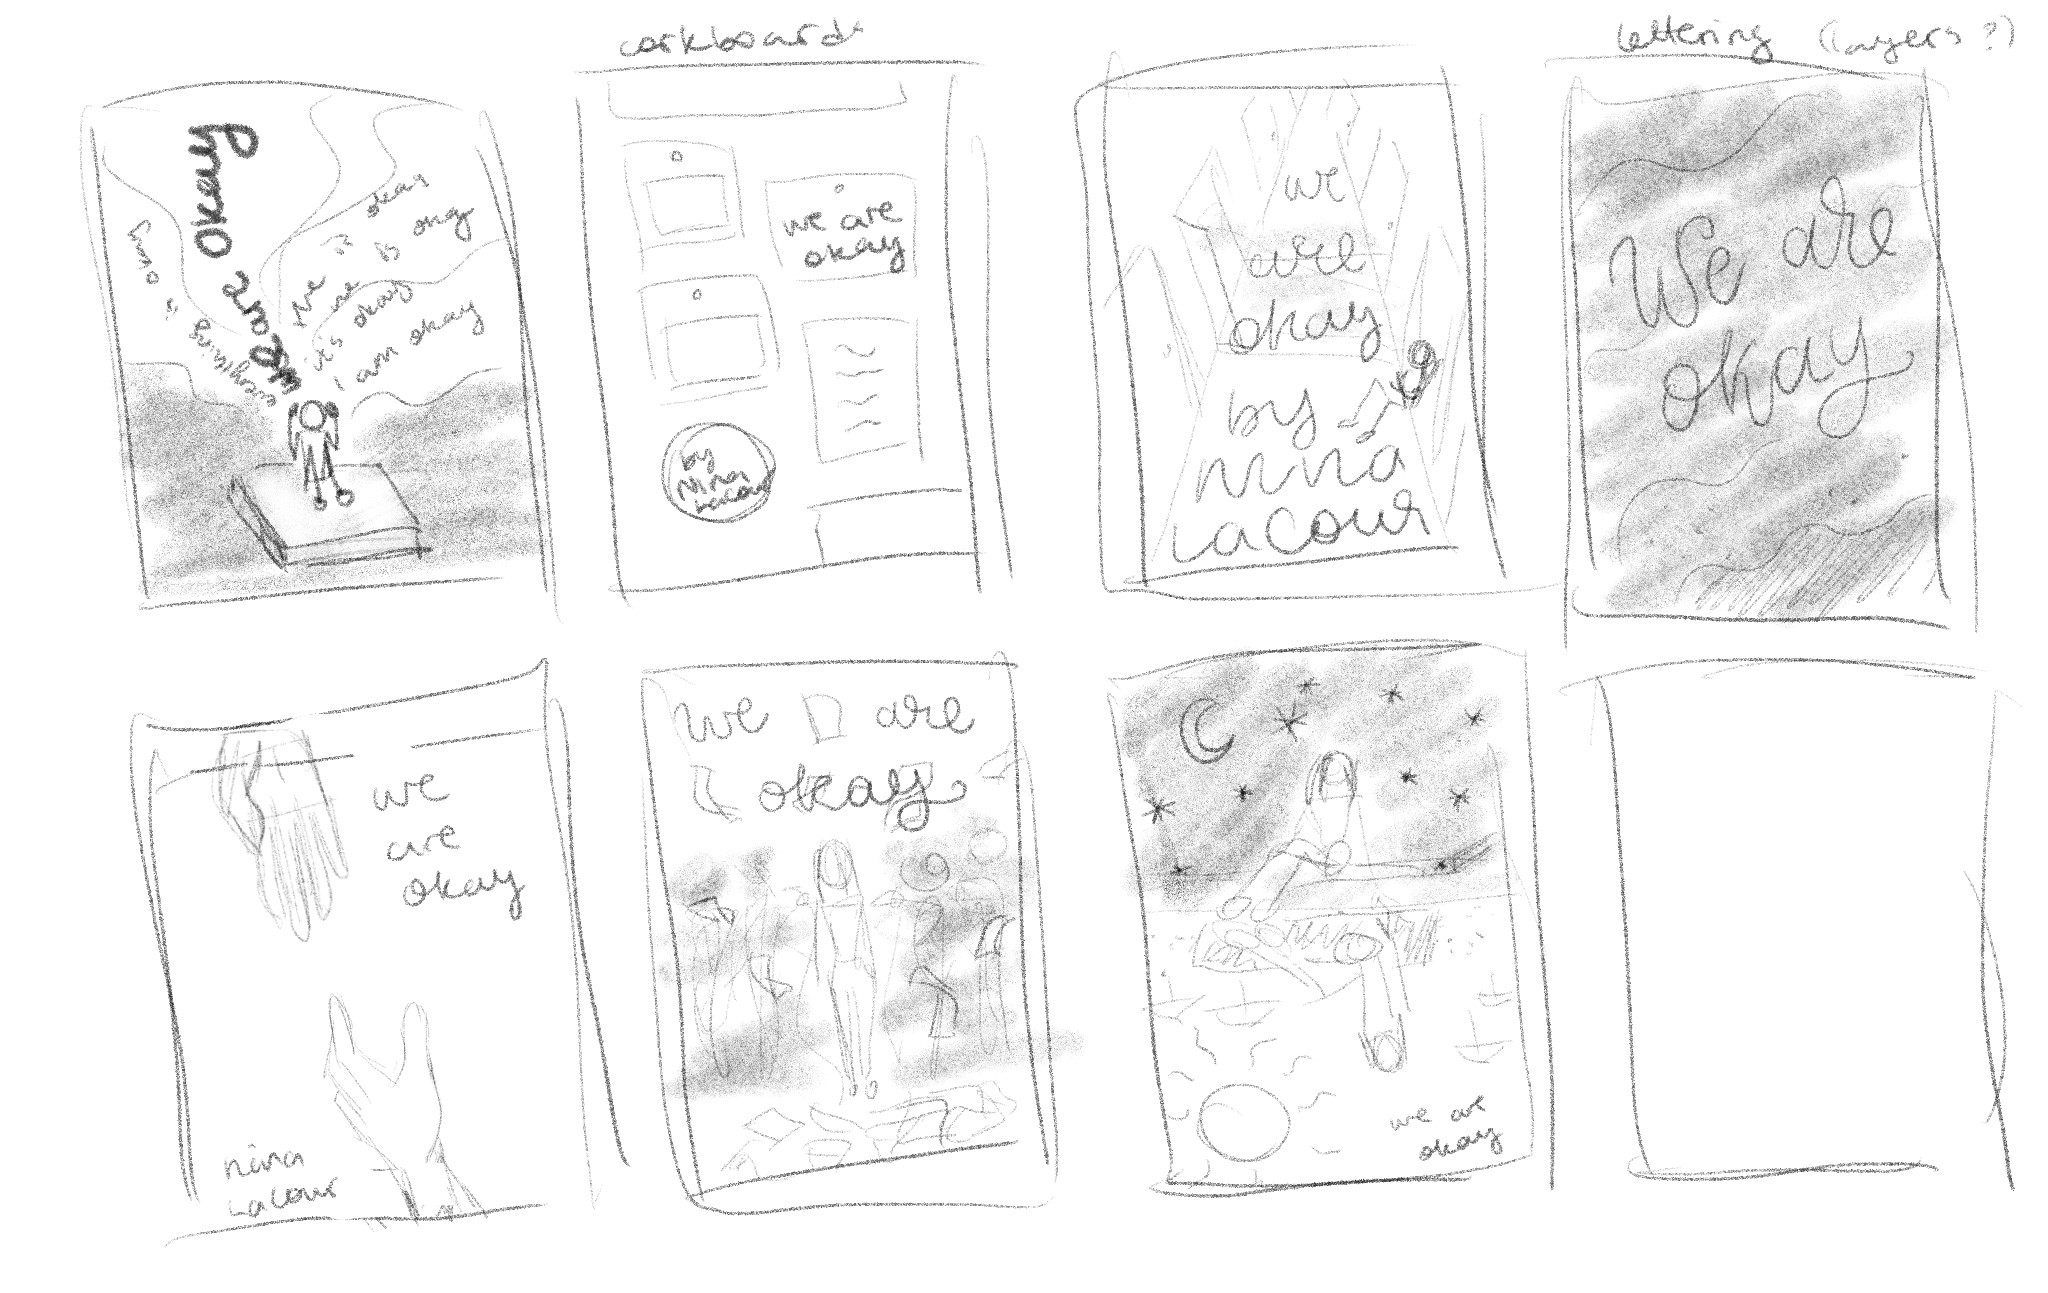 Sever cover sketches for We Are Okay. Features hand lettering, a board of notes, a hallway, hands heaching for each other, and other things.